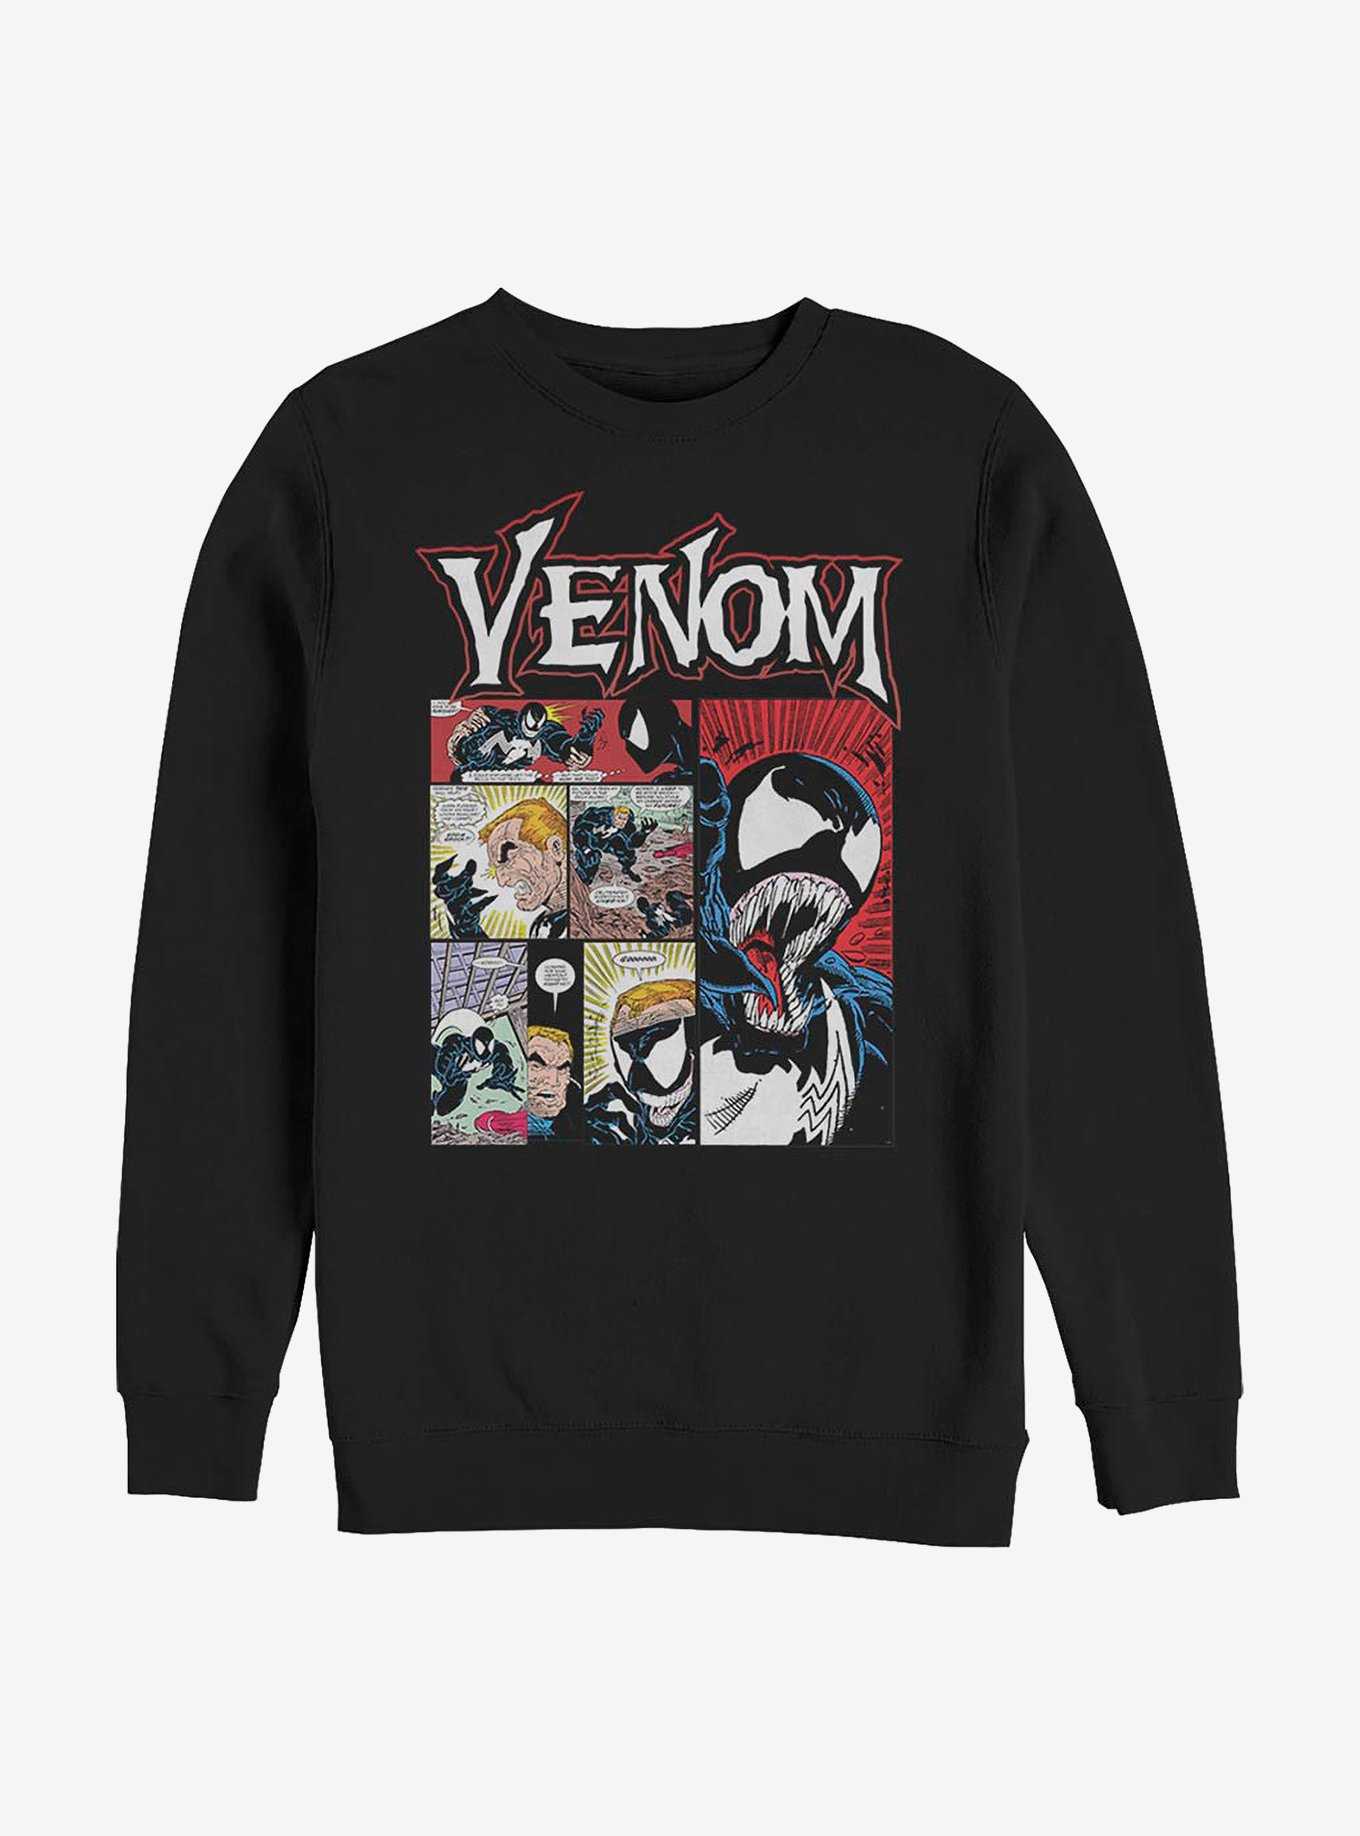 Marvel Venom: Let There Be Carnage Whom The Bell Tolls Sweatshirt, , hi-res